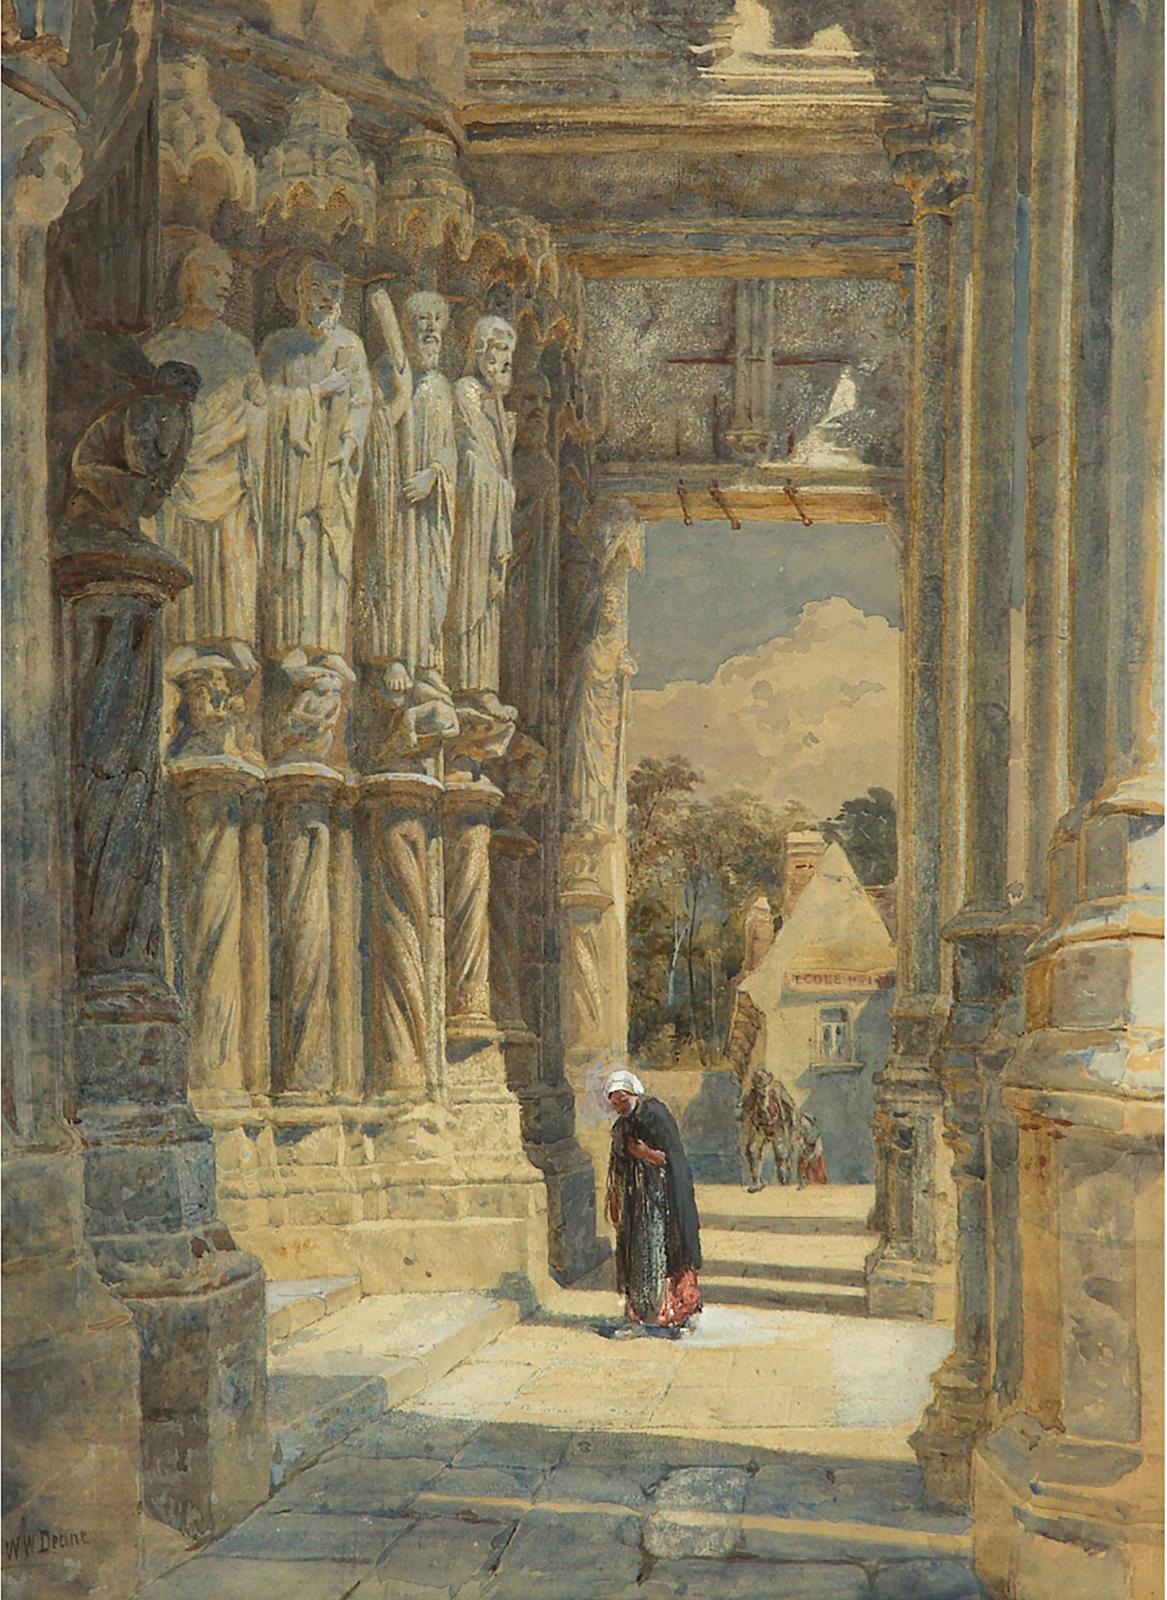 William Wood Deane (1825-1873) - Figures On The Steps Of A Medieval Courtyard